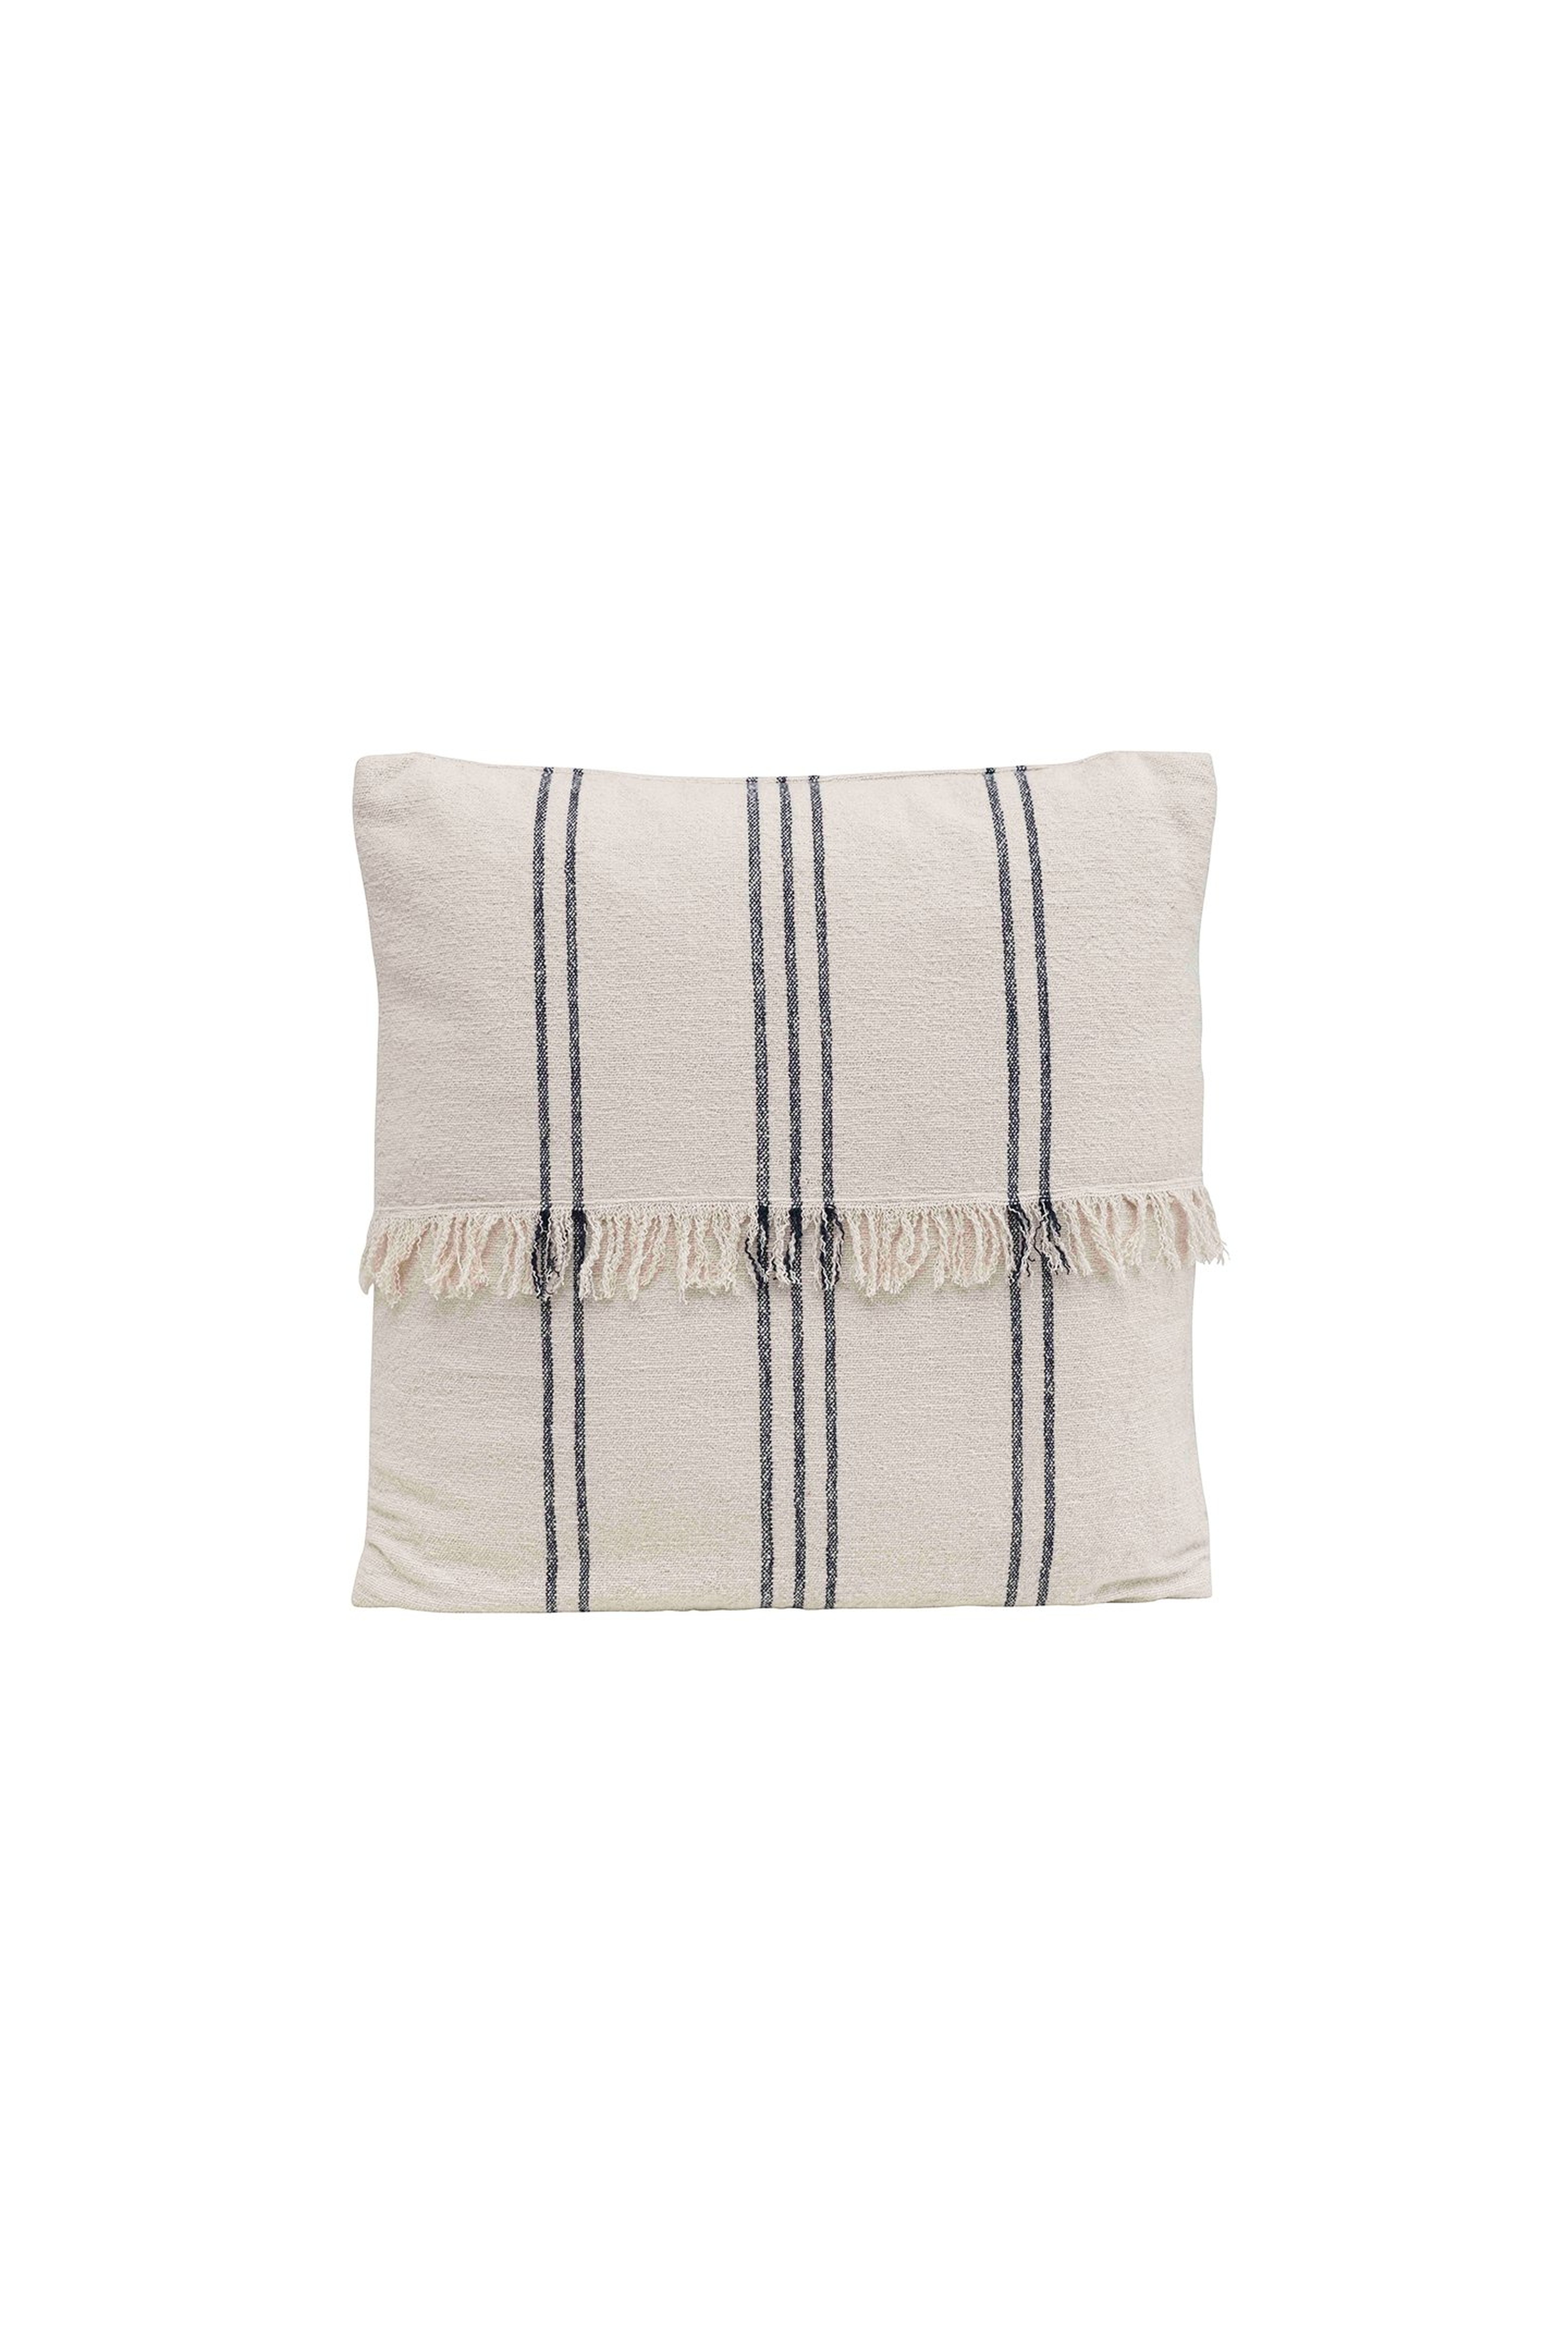 Discontinued - Olema Pillow, 22"x 22" - Cove Goods